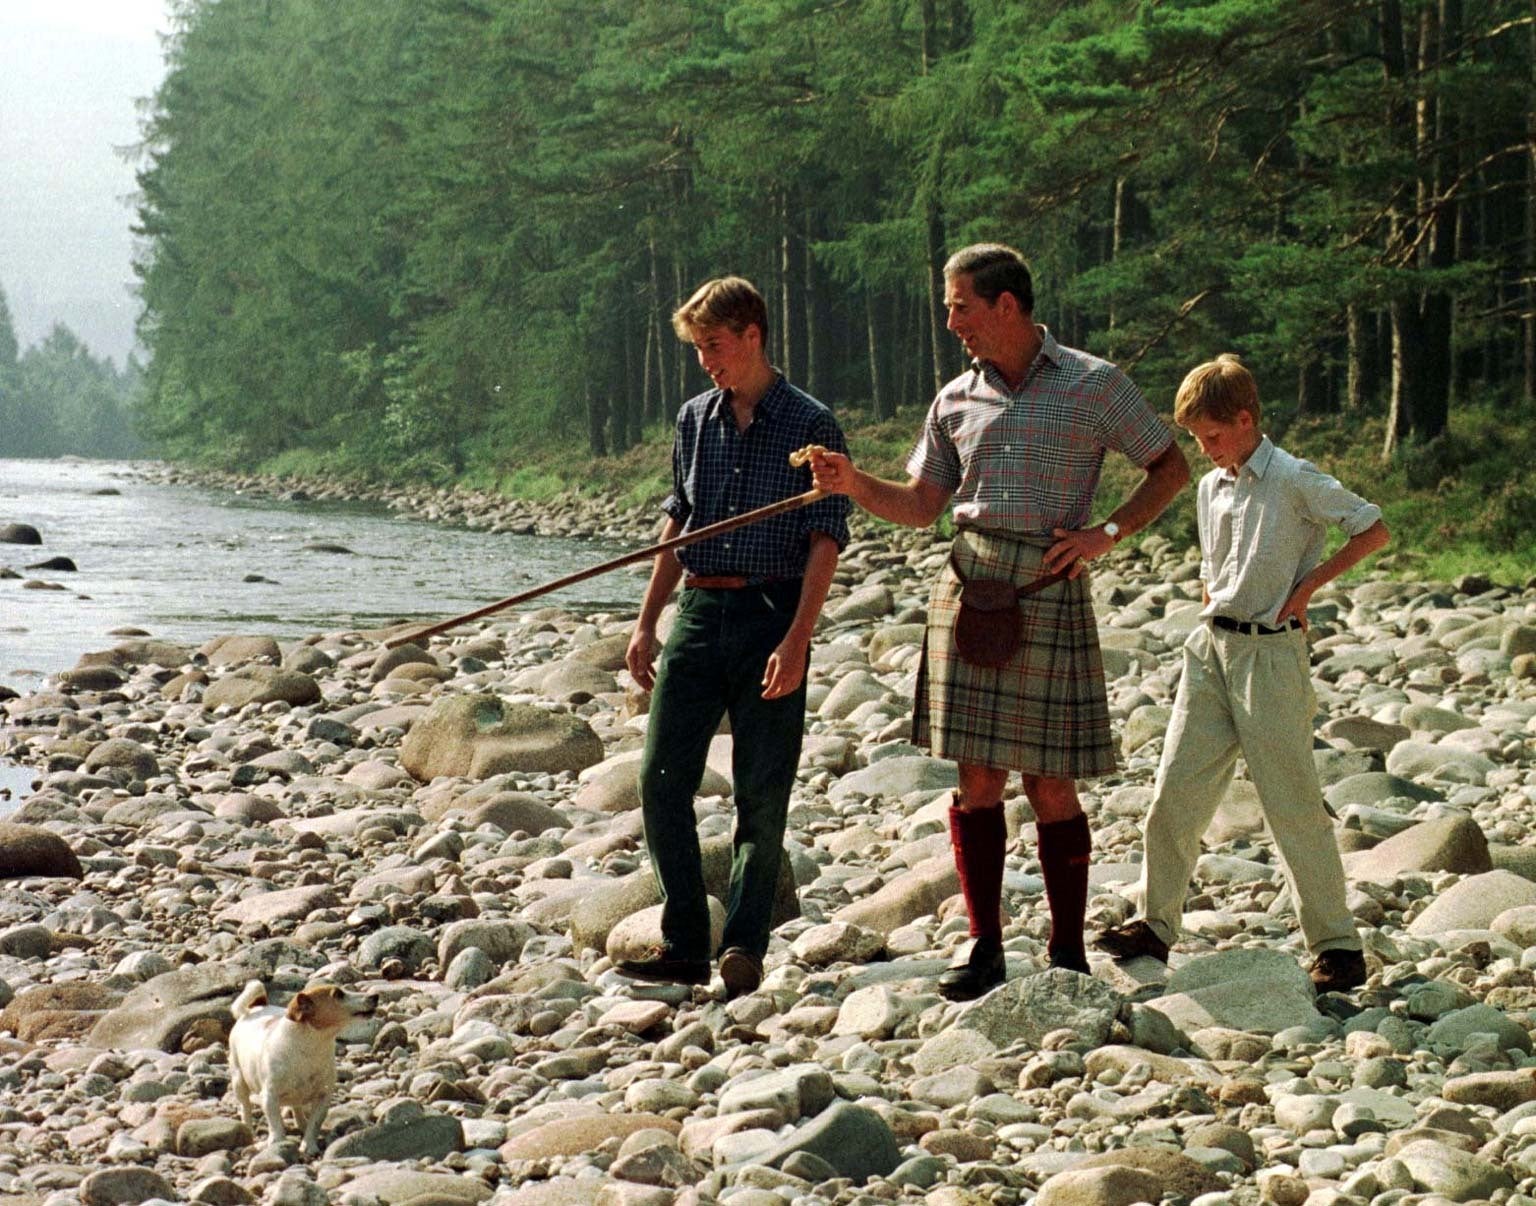 The Prince of Wales and his sons William, 15, and Harry, 12, take an early morning walk along the banks of the River Dee on the Balmoral estate in 1997